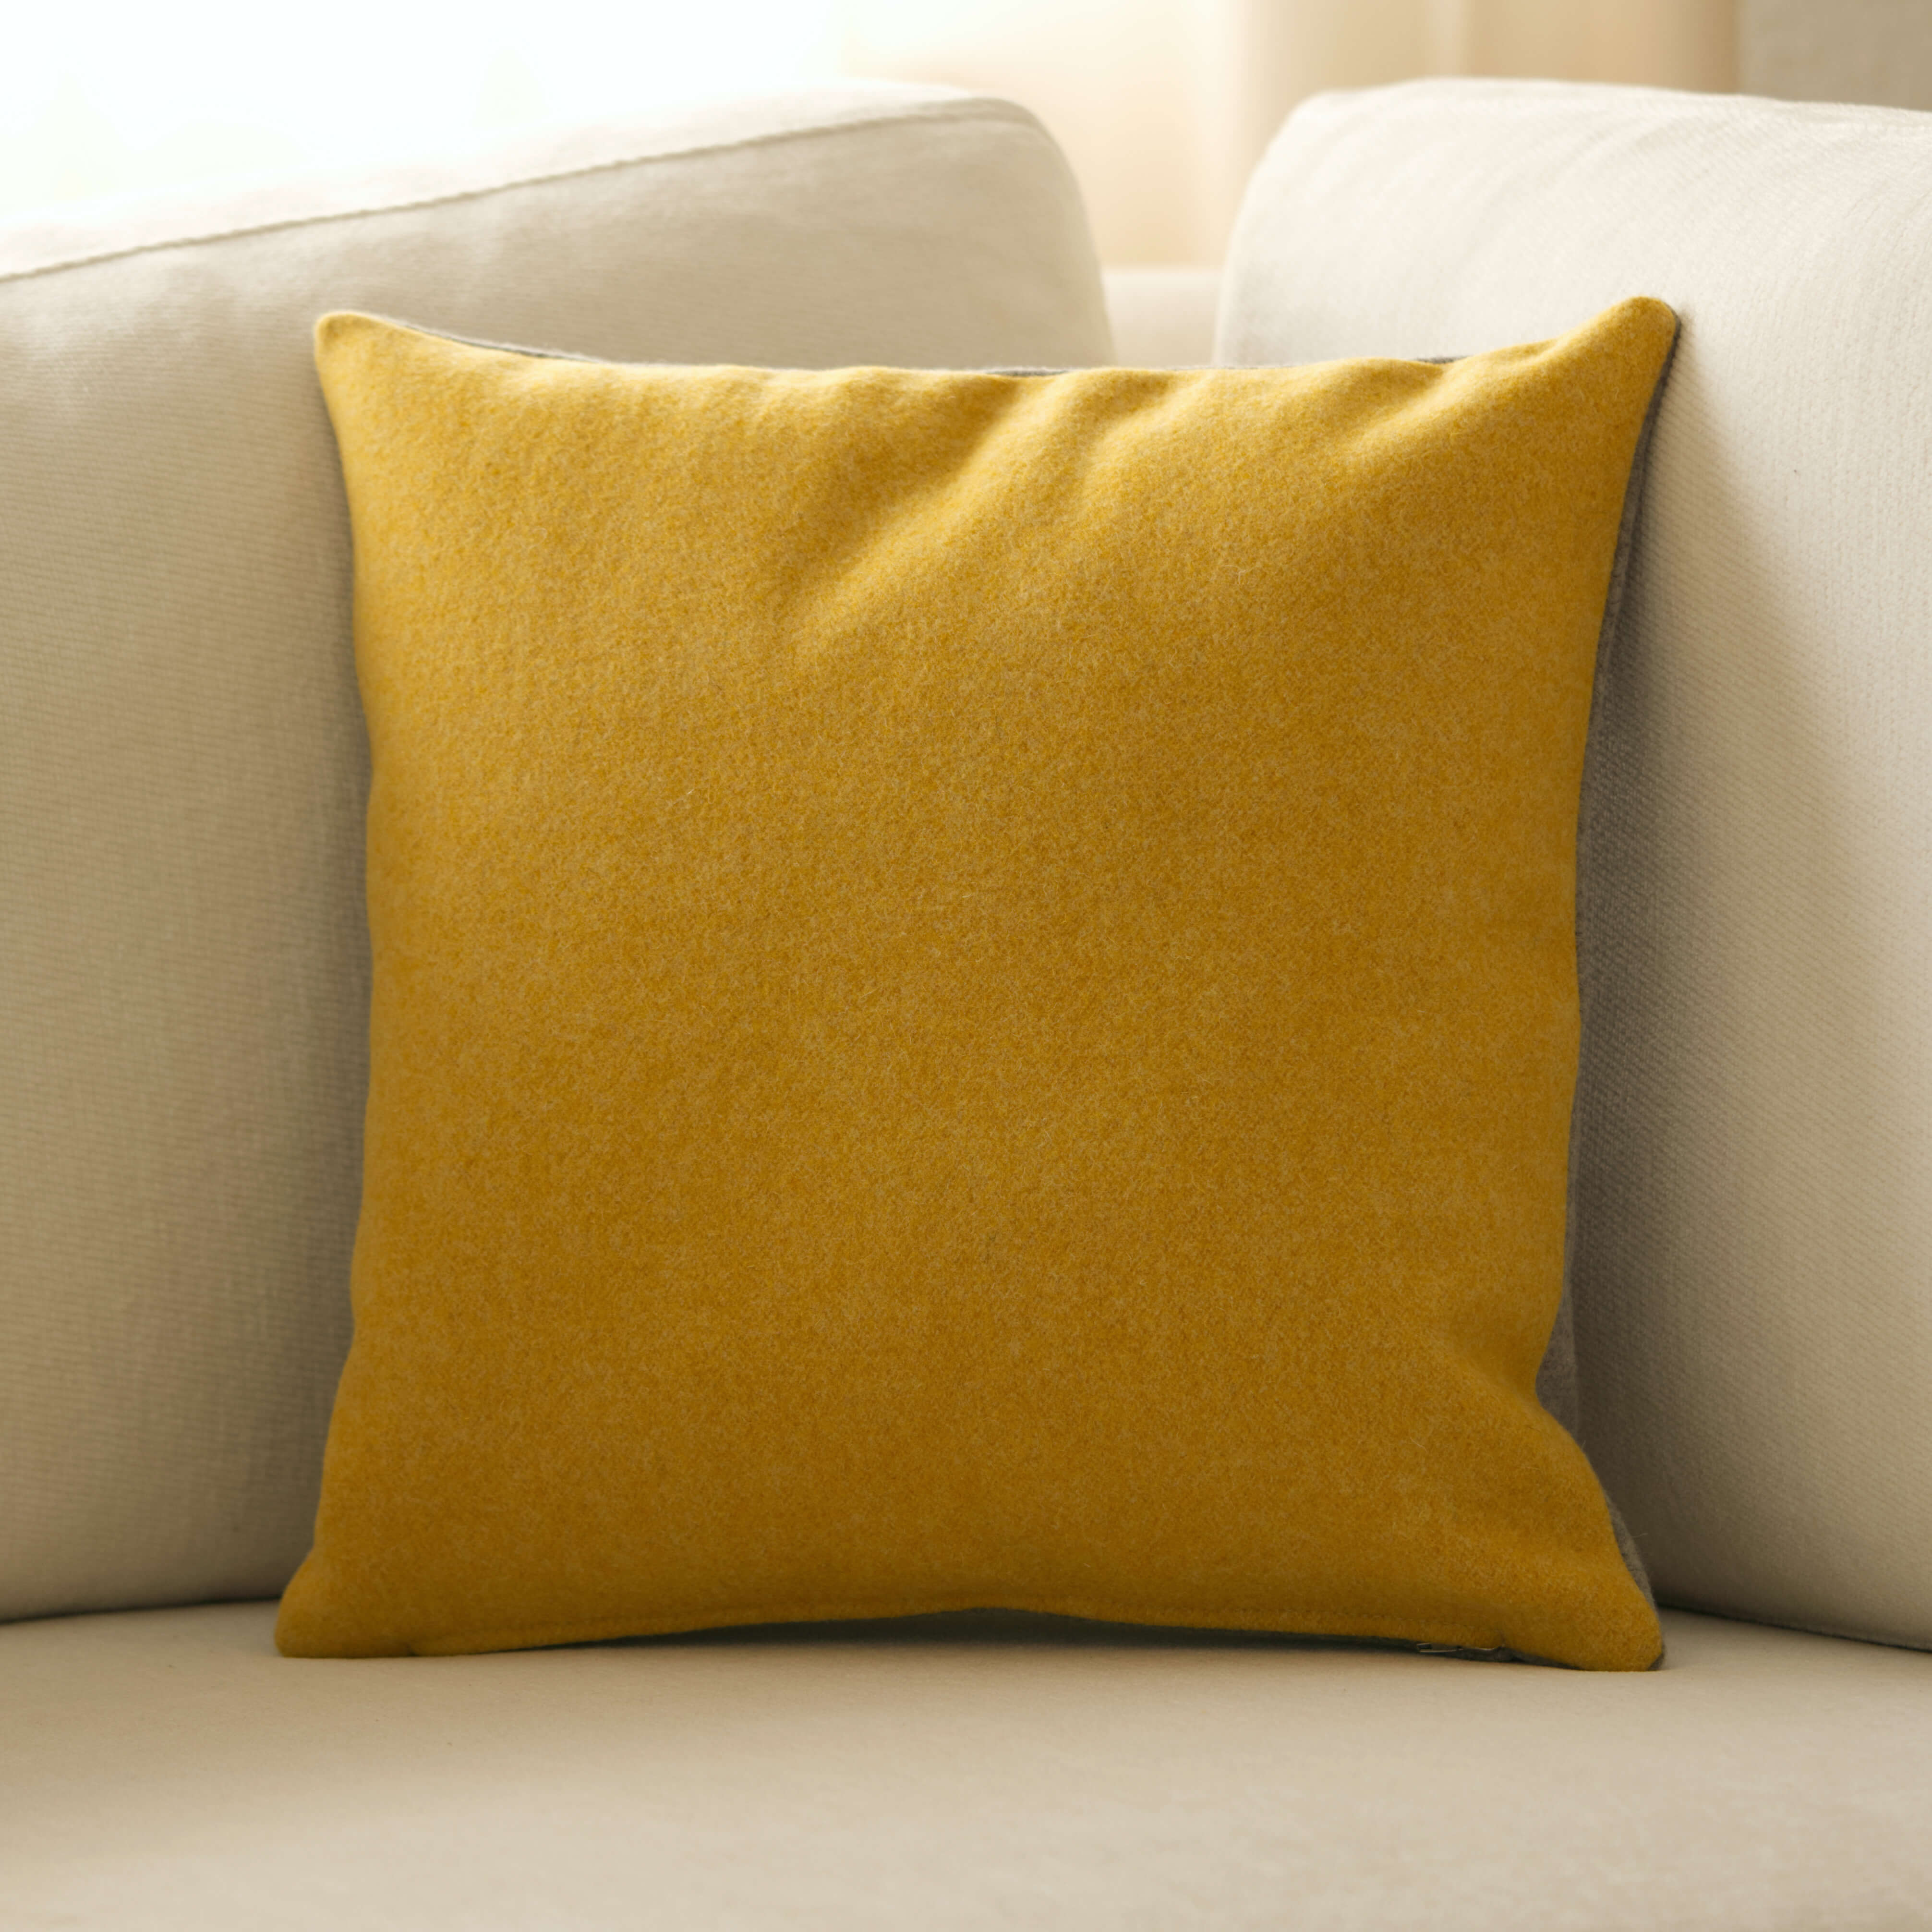 Decorative Cushion Bicolor 40 x 40 cm, 100% Sheep Wool – Double-Sided: Amber & Light Gray